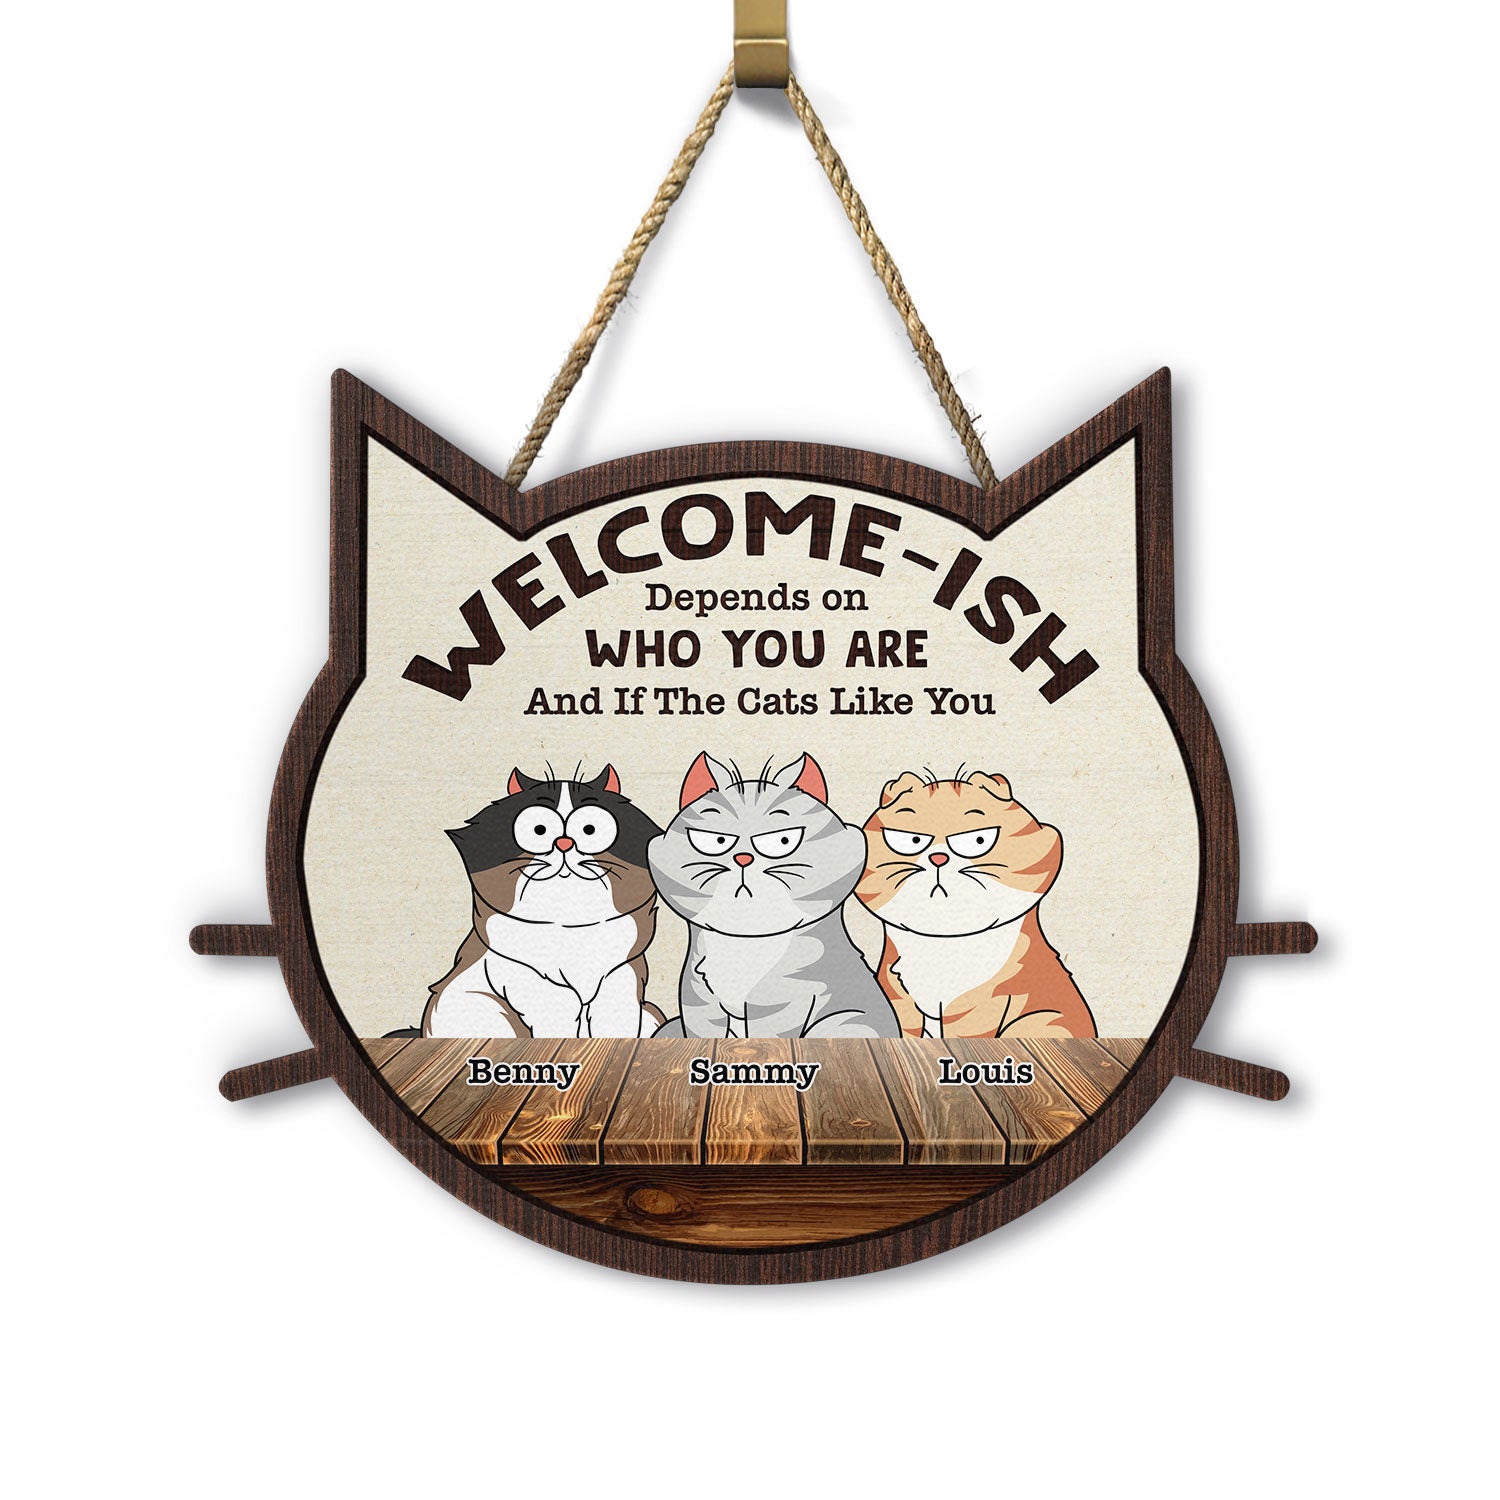 Welcome-ish Depends On Who You Are - Home Decor, Funny Gift For Cat Lovers - Personalized Custom Shaped Wood Sign